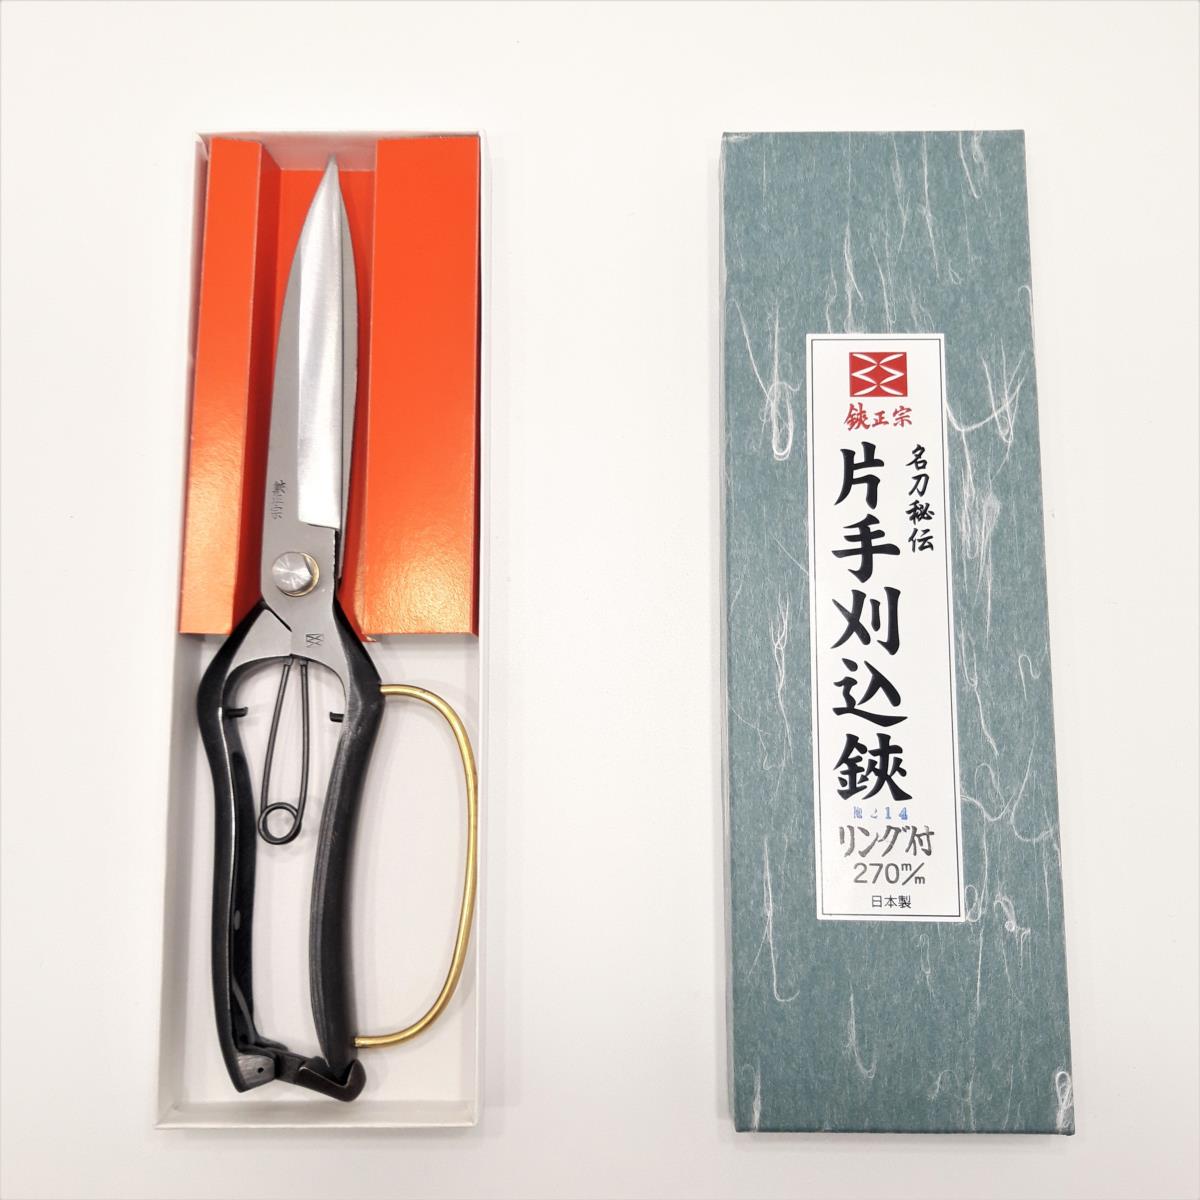 One-hand japanese shears for topiaries, MASAMUNE brand.